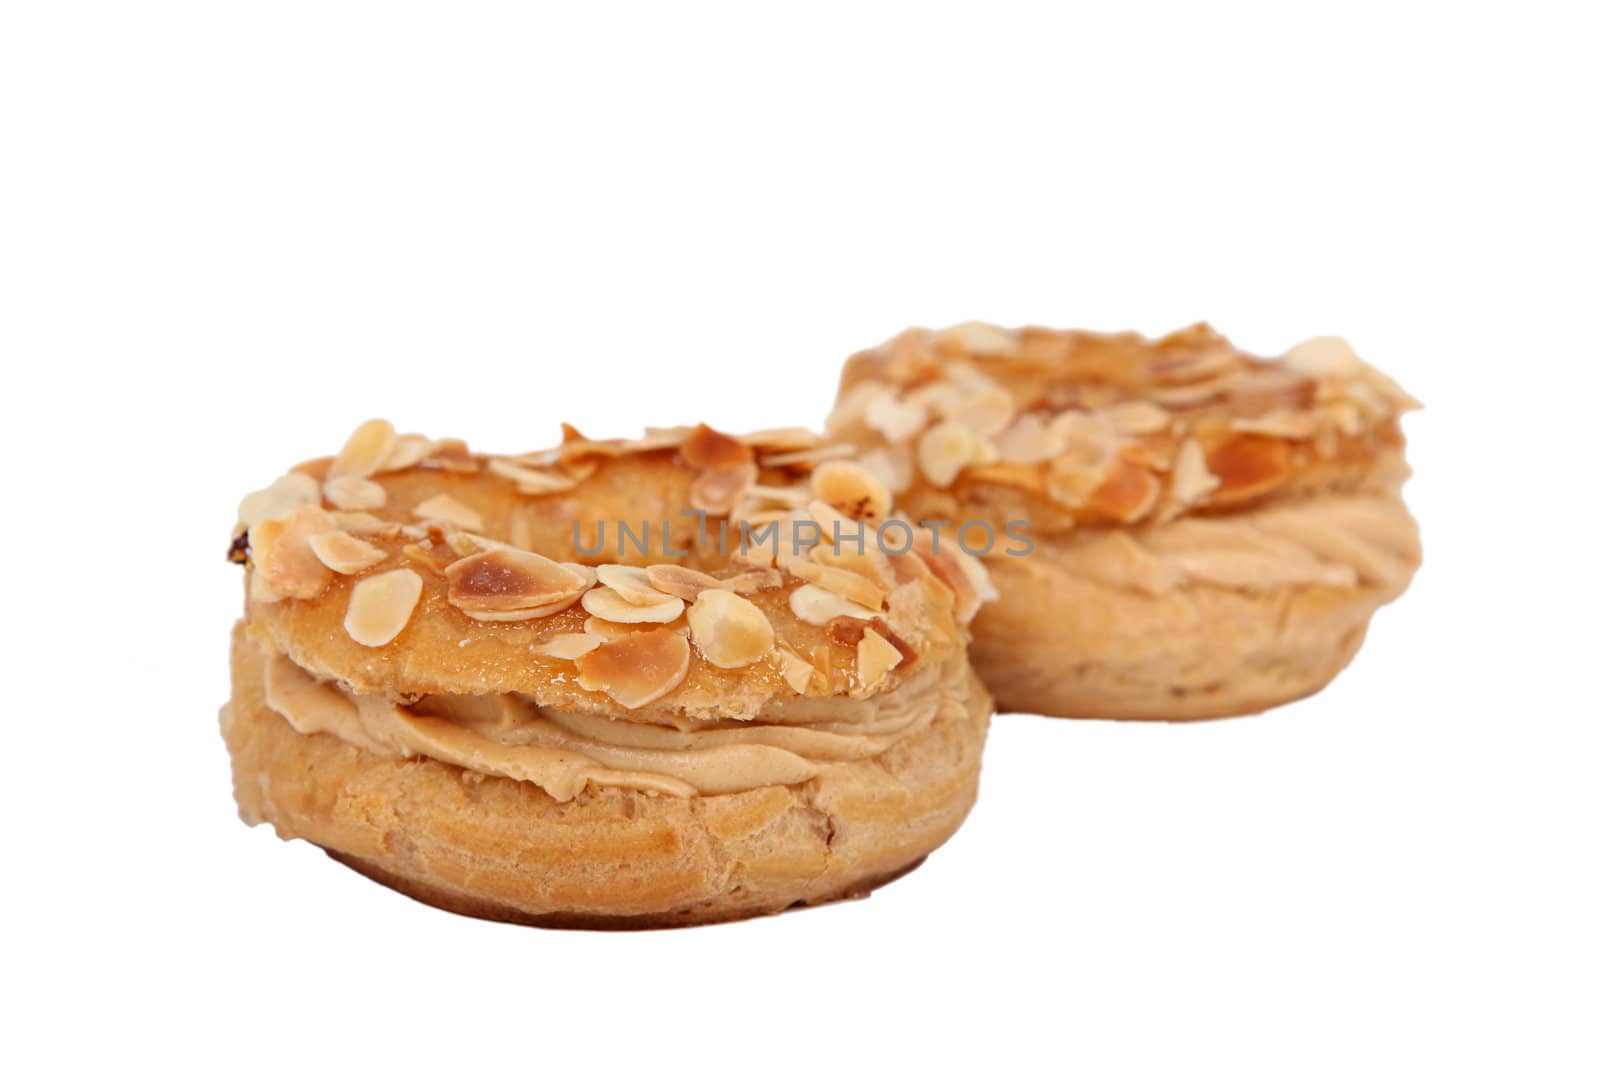 Two almond covered macaroons by phovoir